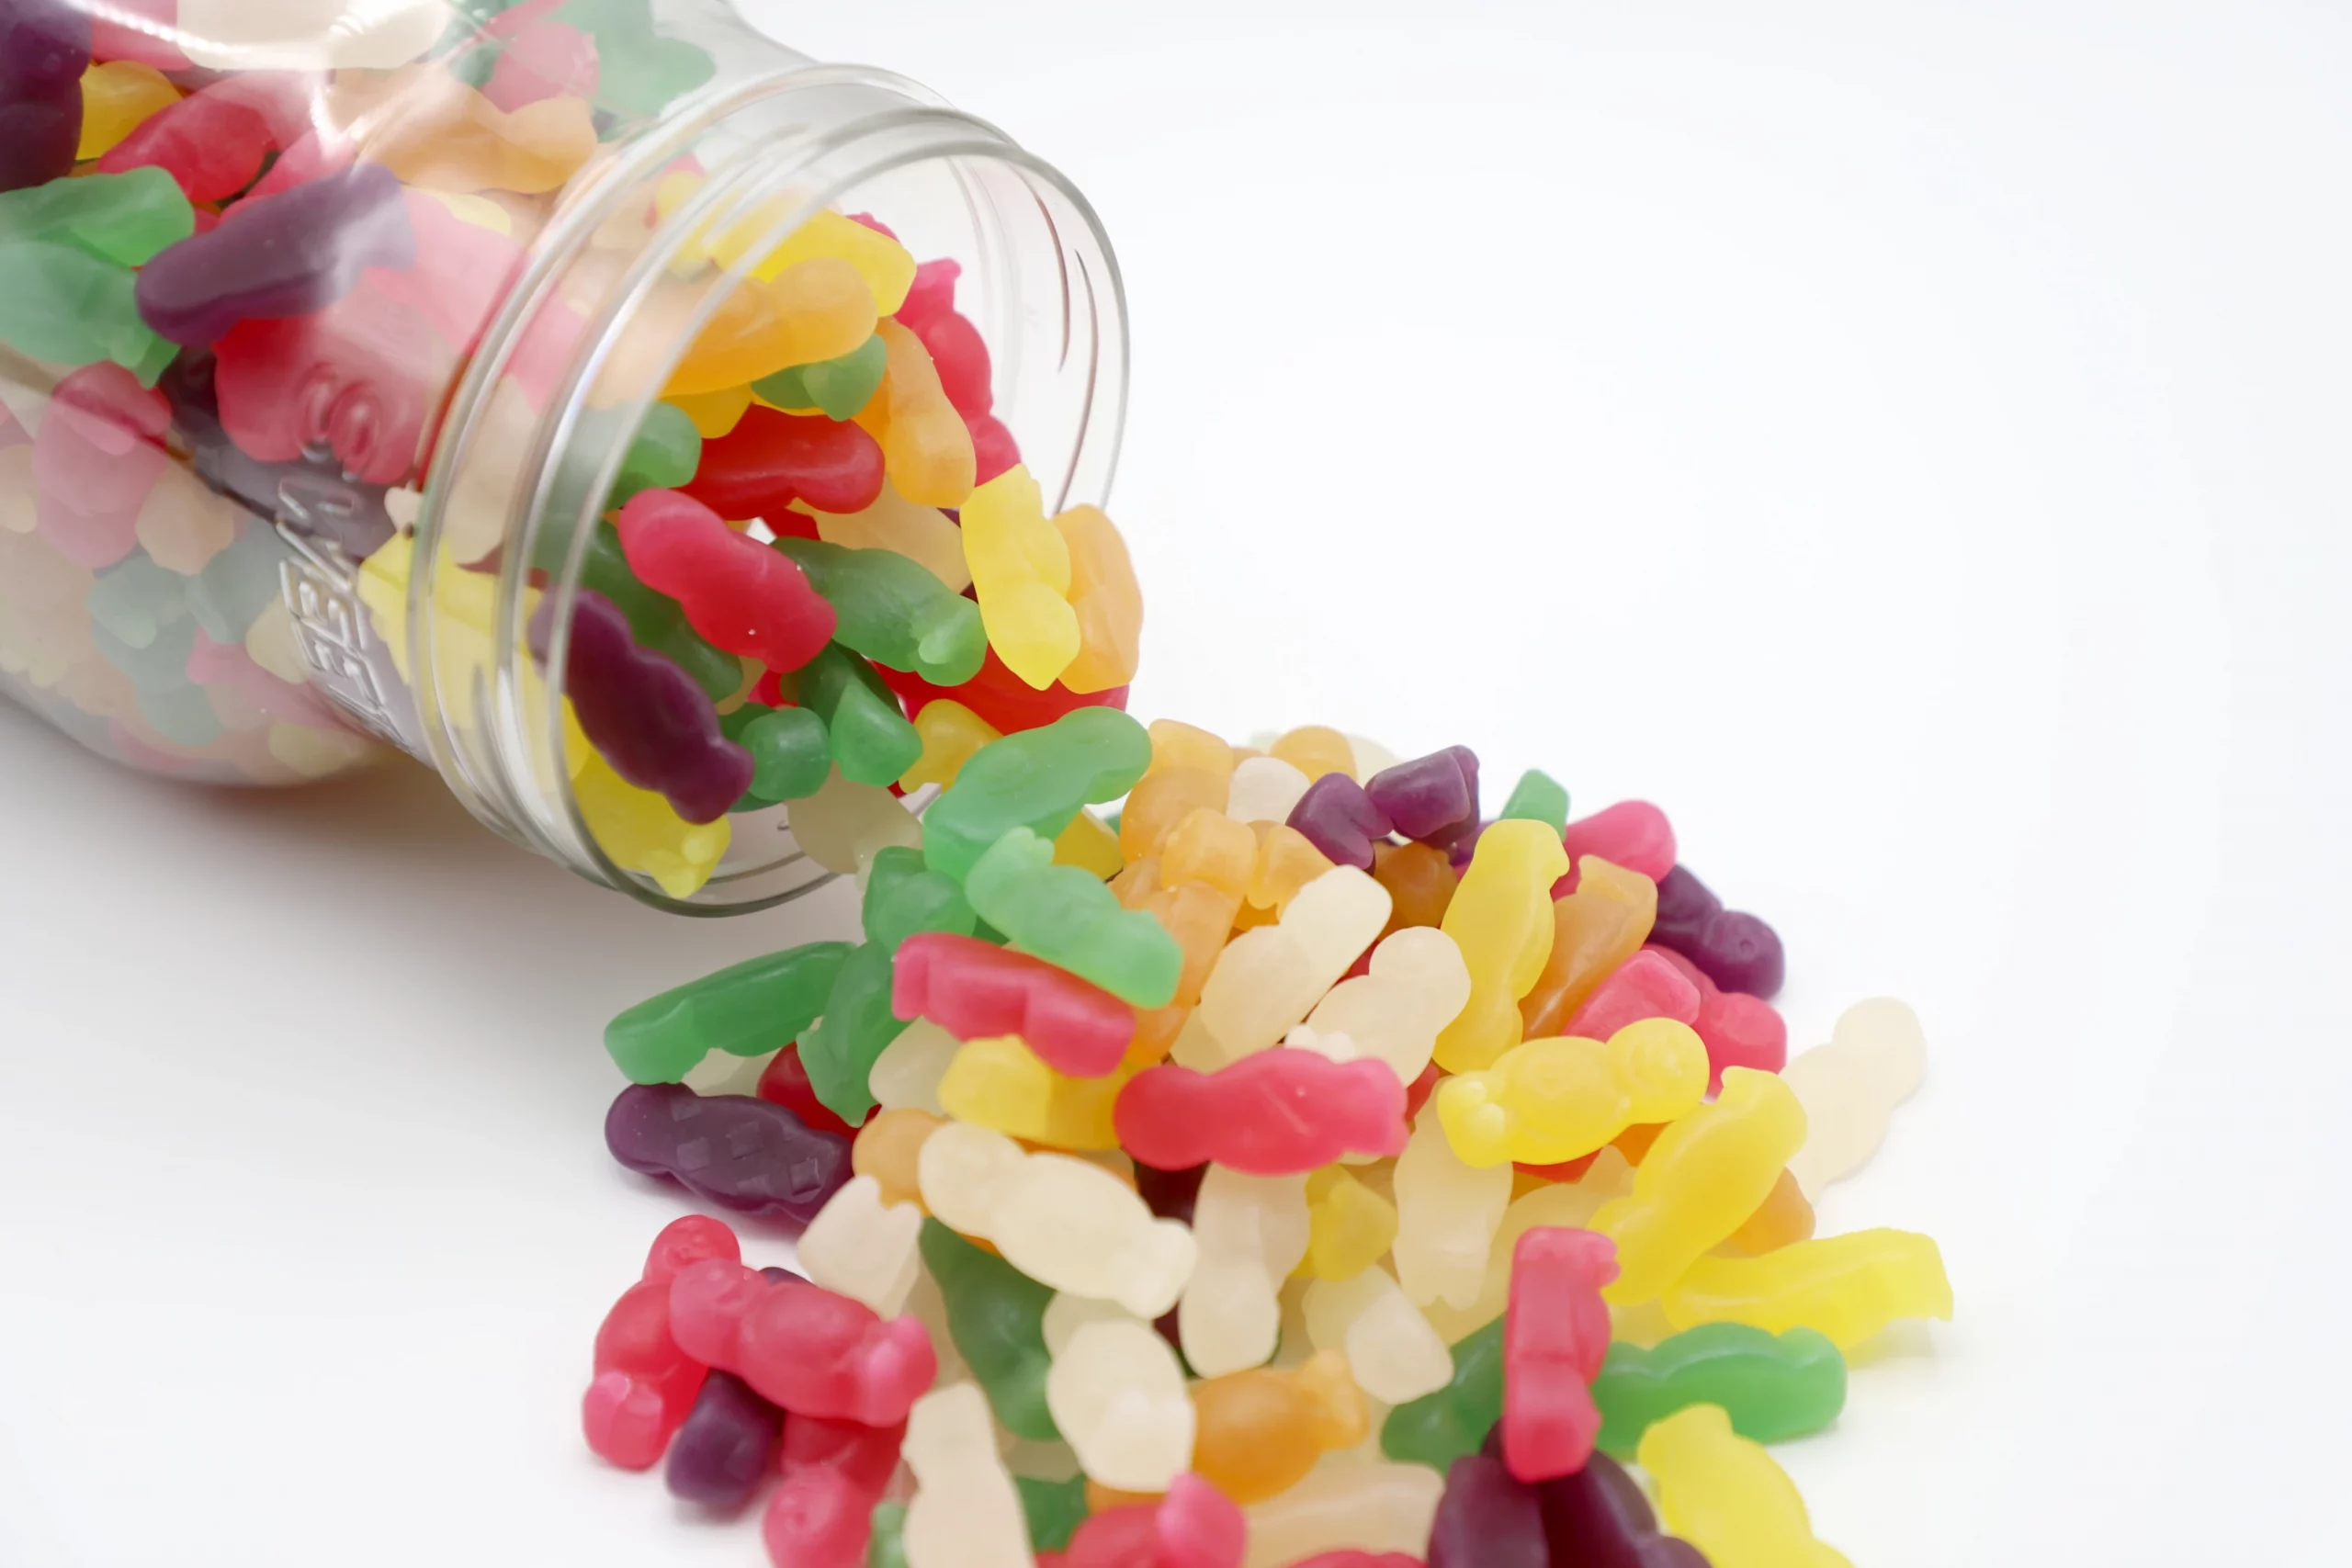 Haribo Jelly Babies - The Shop - Sweets for the UK